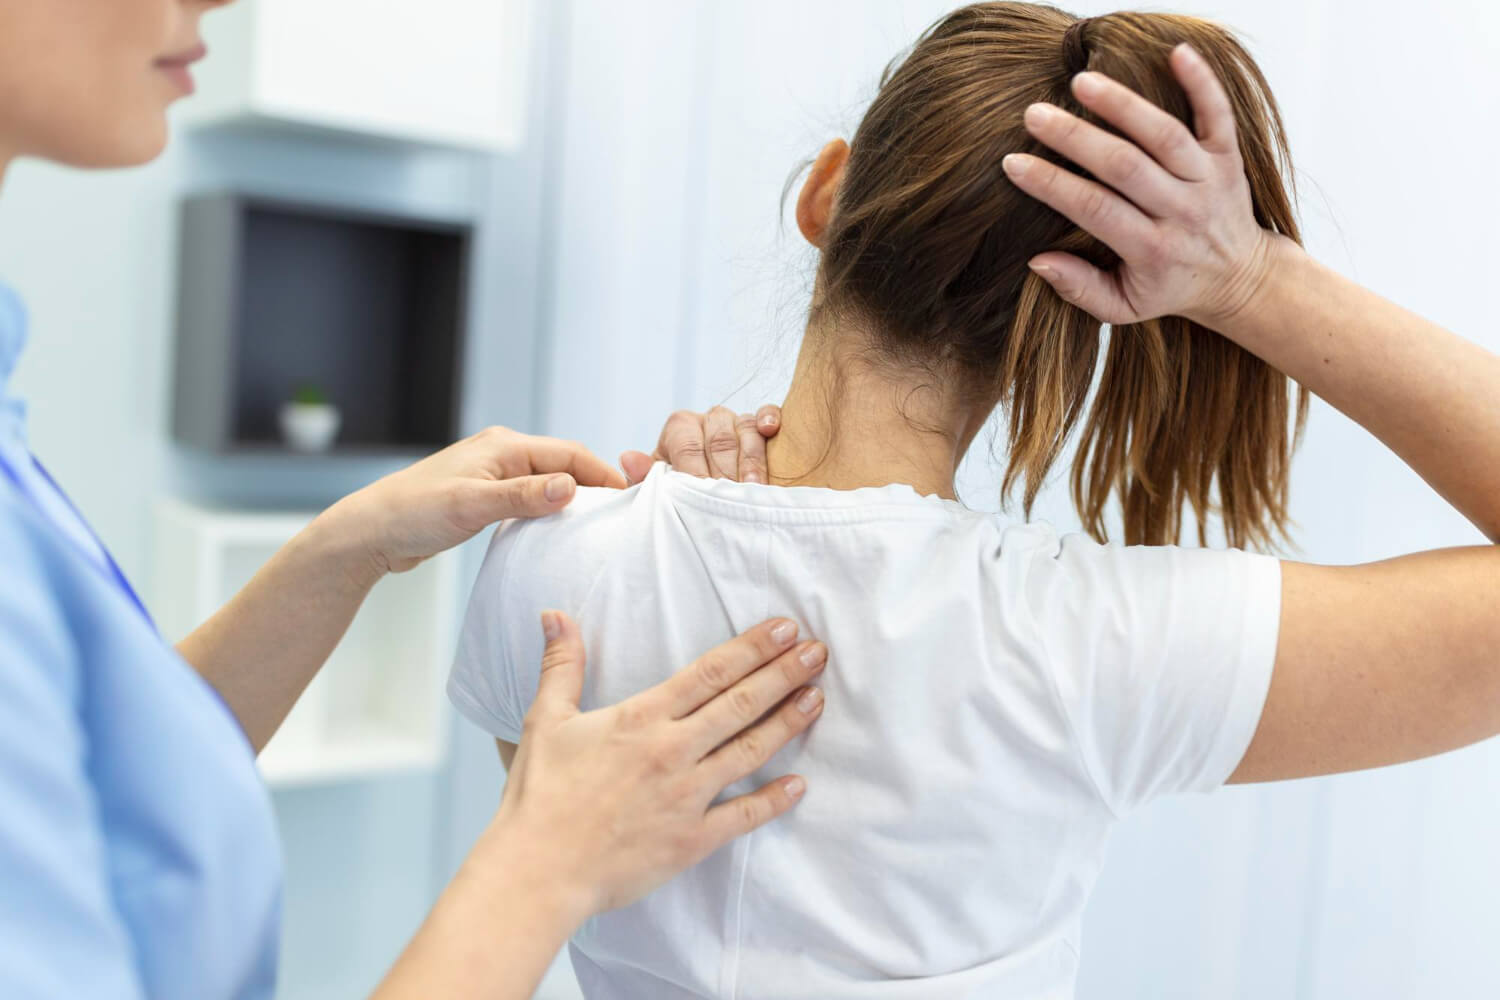 What is Neck Pain Treatment?